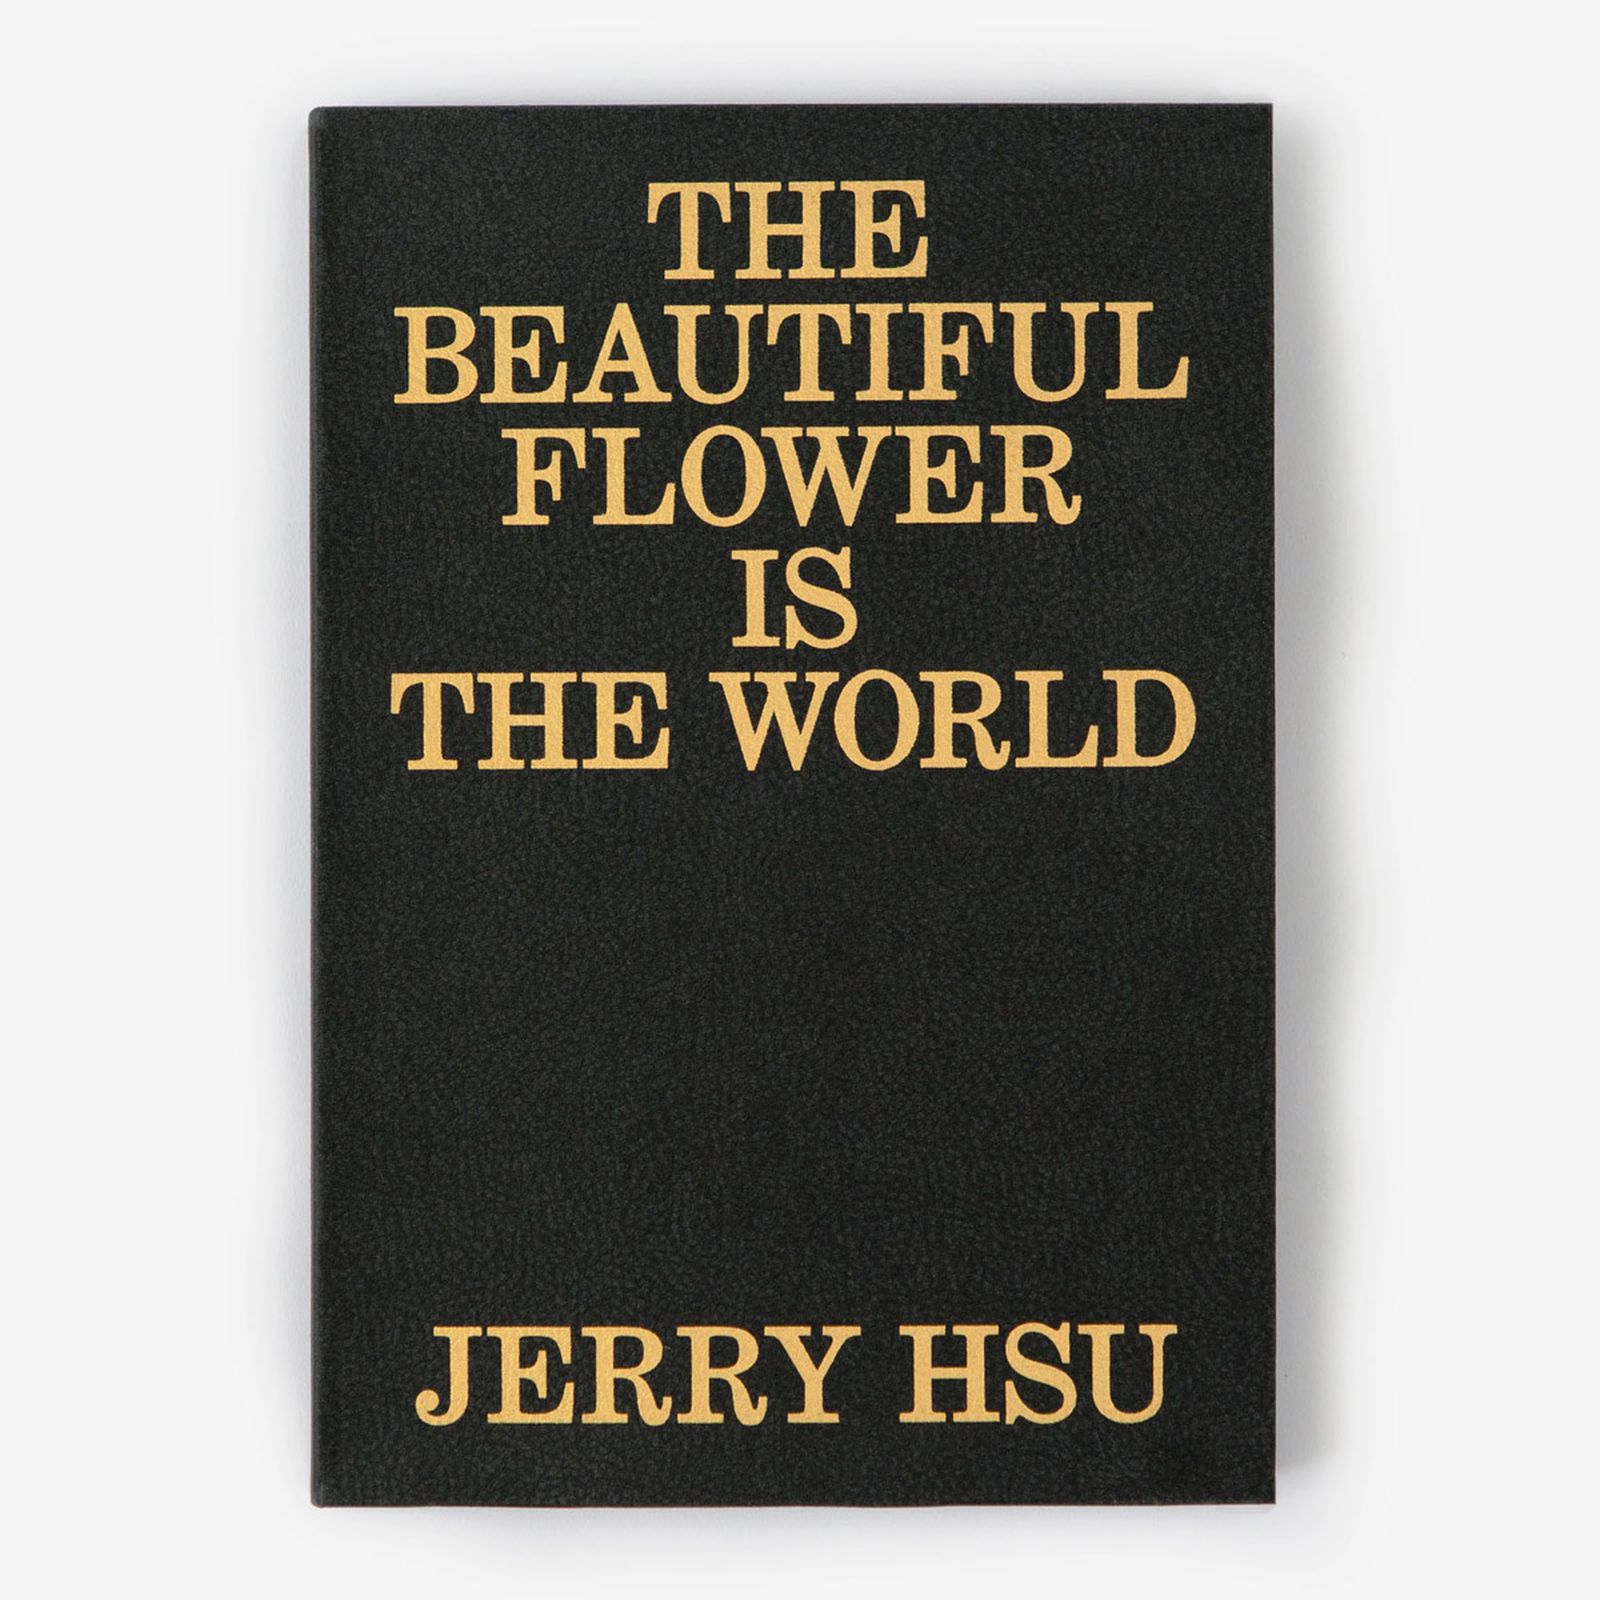 jerry hsu interview beautiful flower is the world The Beautiful Flower is The World